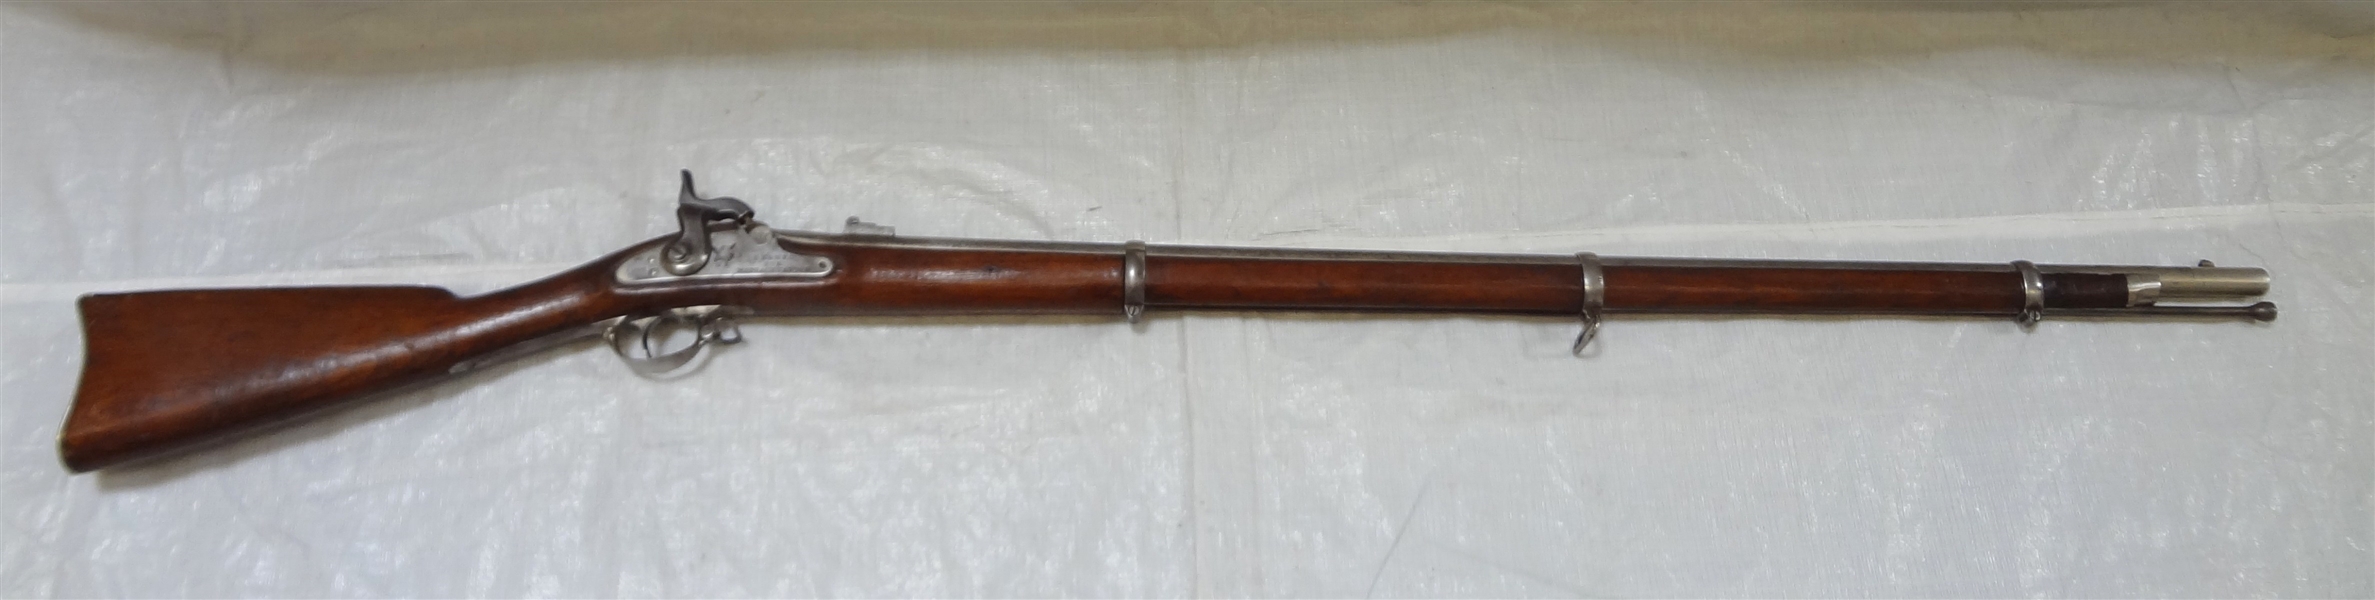 Model 1863, S. Norris & W.T. Clement Contract Rifled Musket